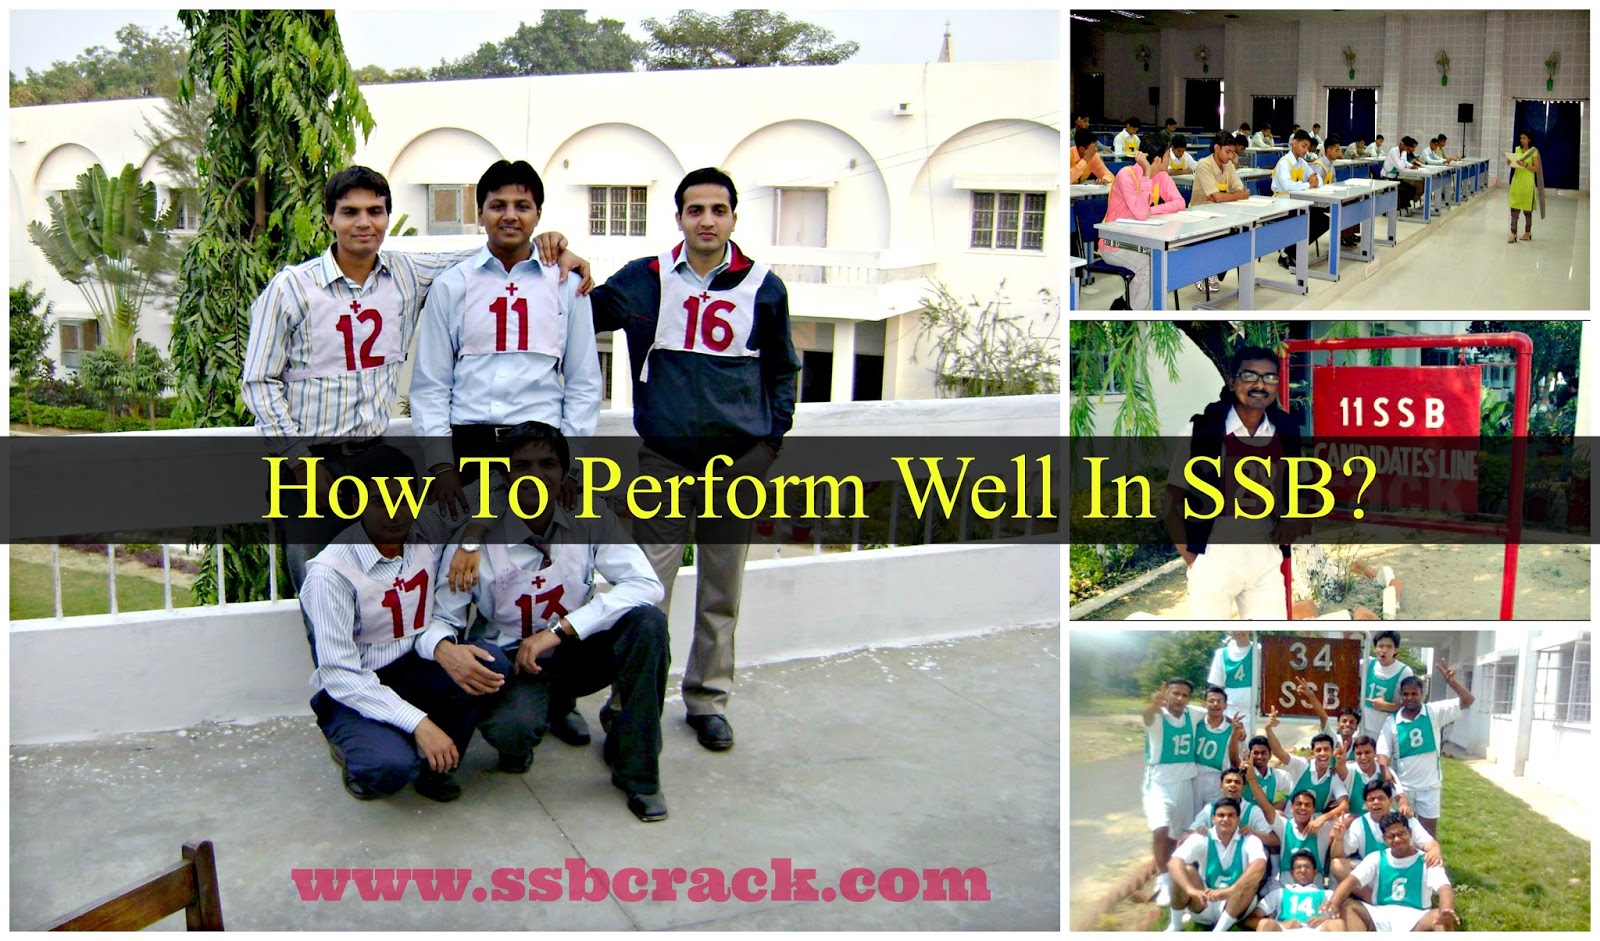 How To Perform Well In SSB?